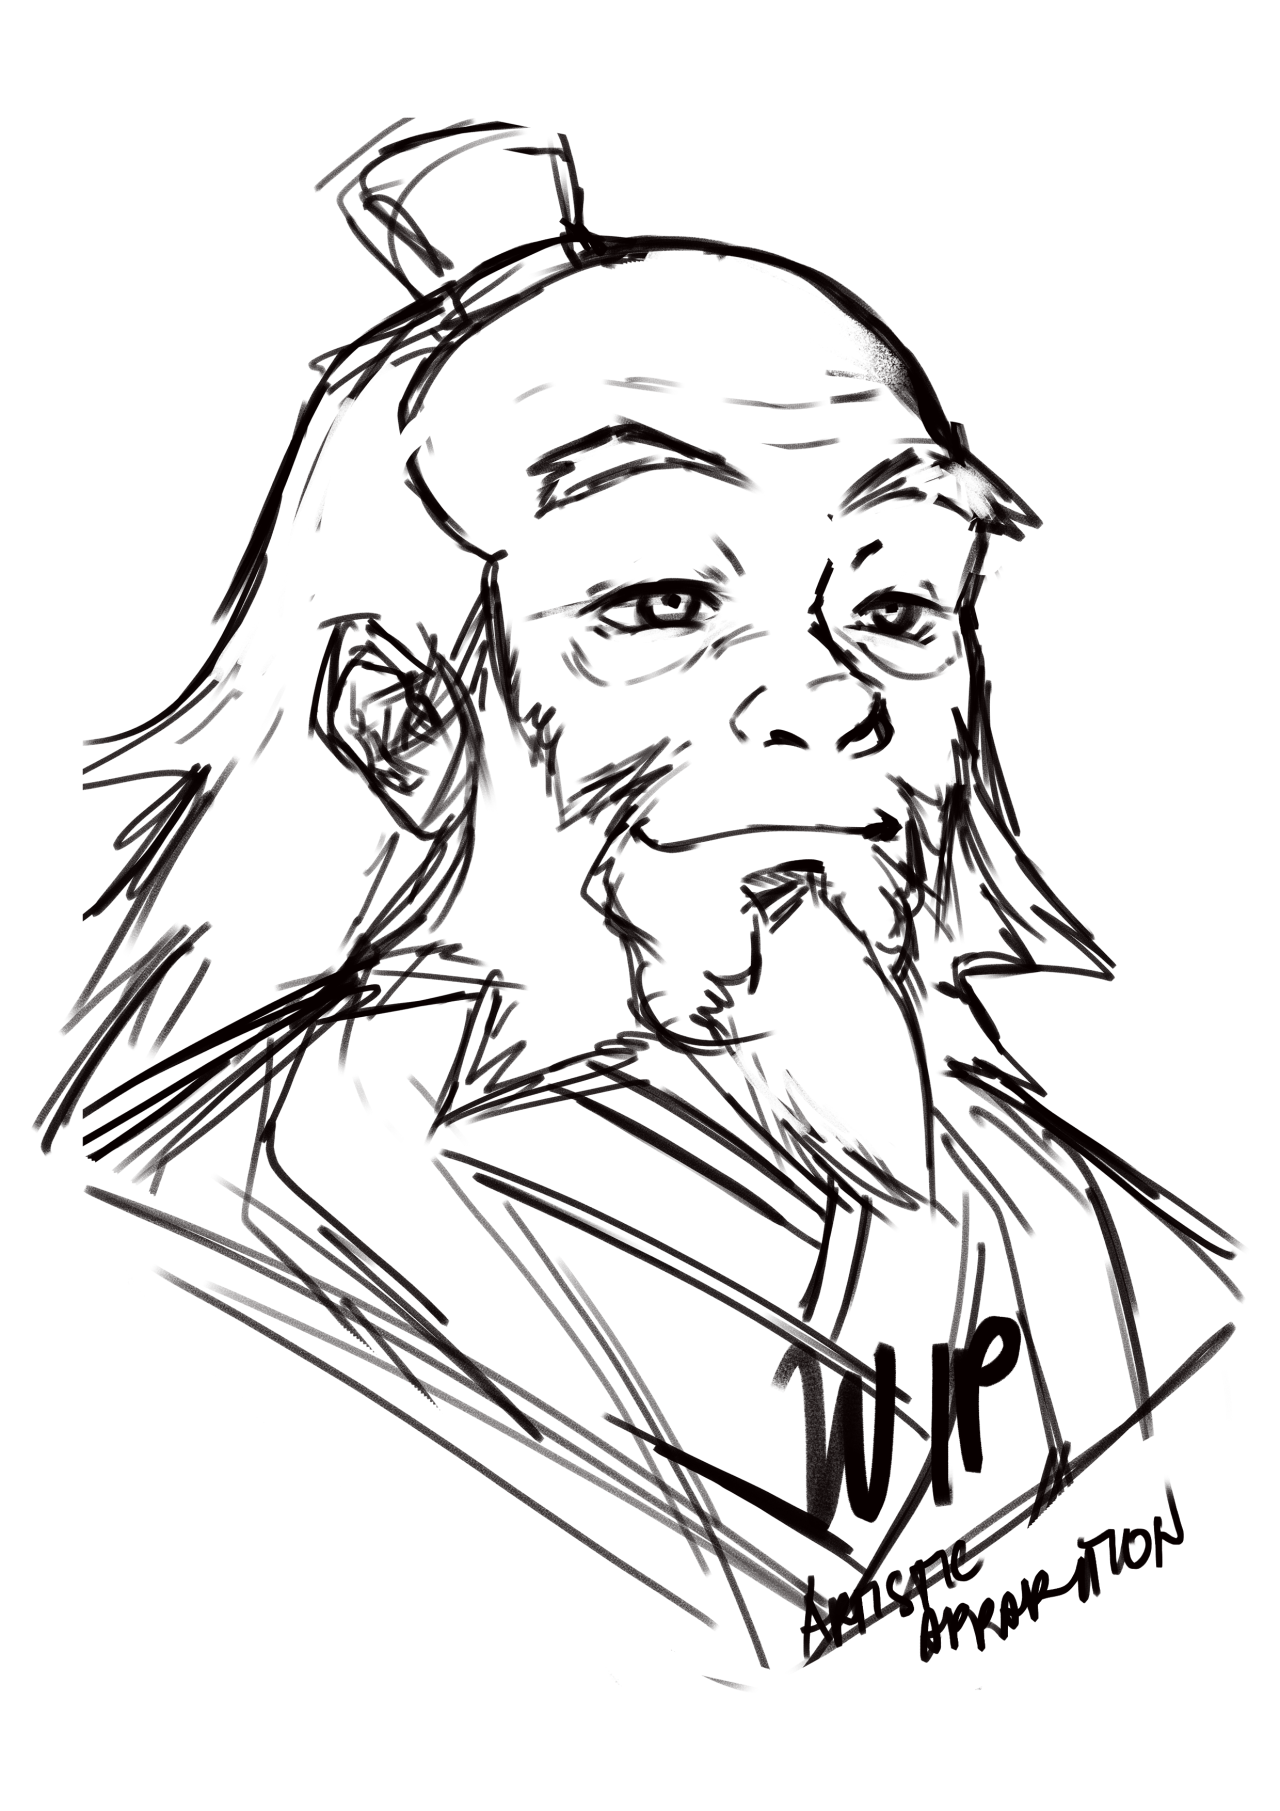 Uncle iroh drawing : r/TheLastAirbender